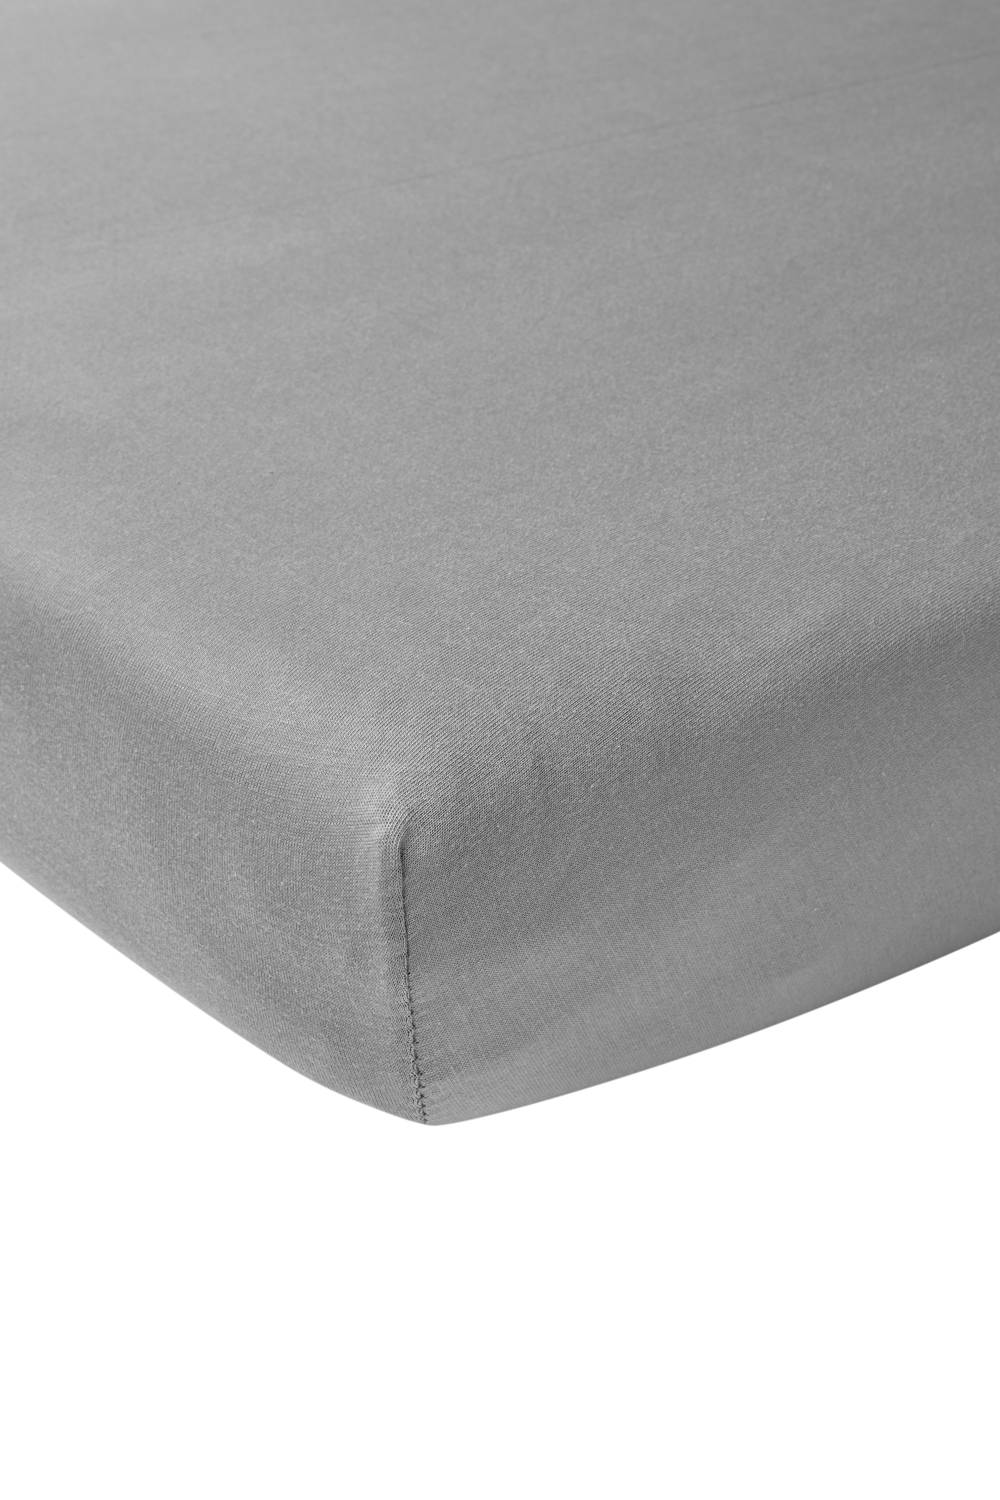 Jersey Fitted Sheet - Grey - 60X120cm